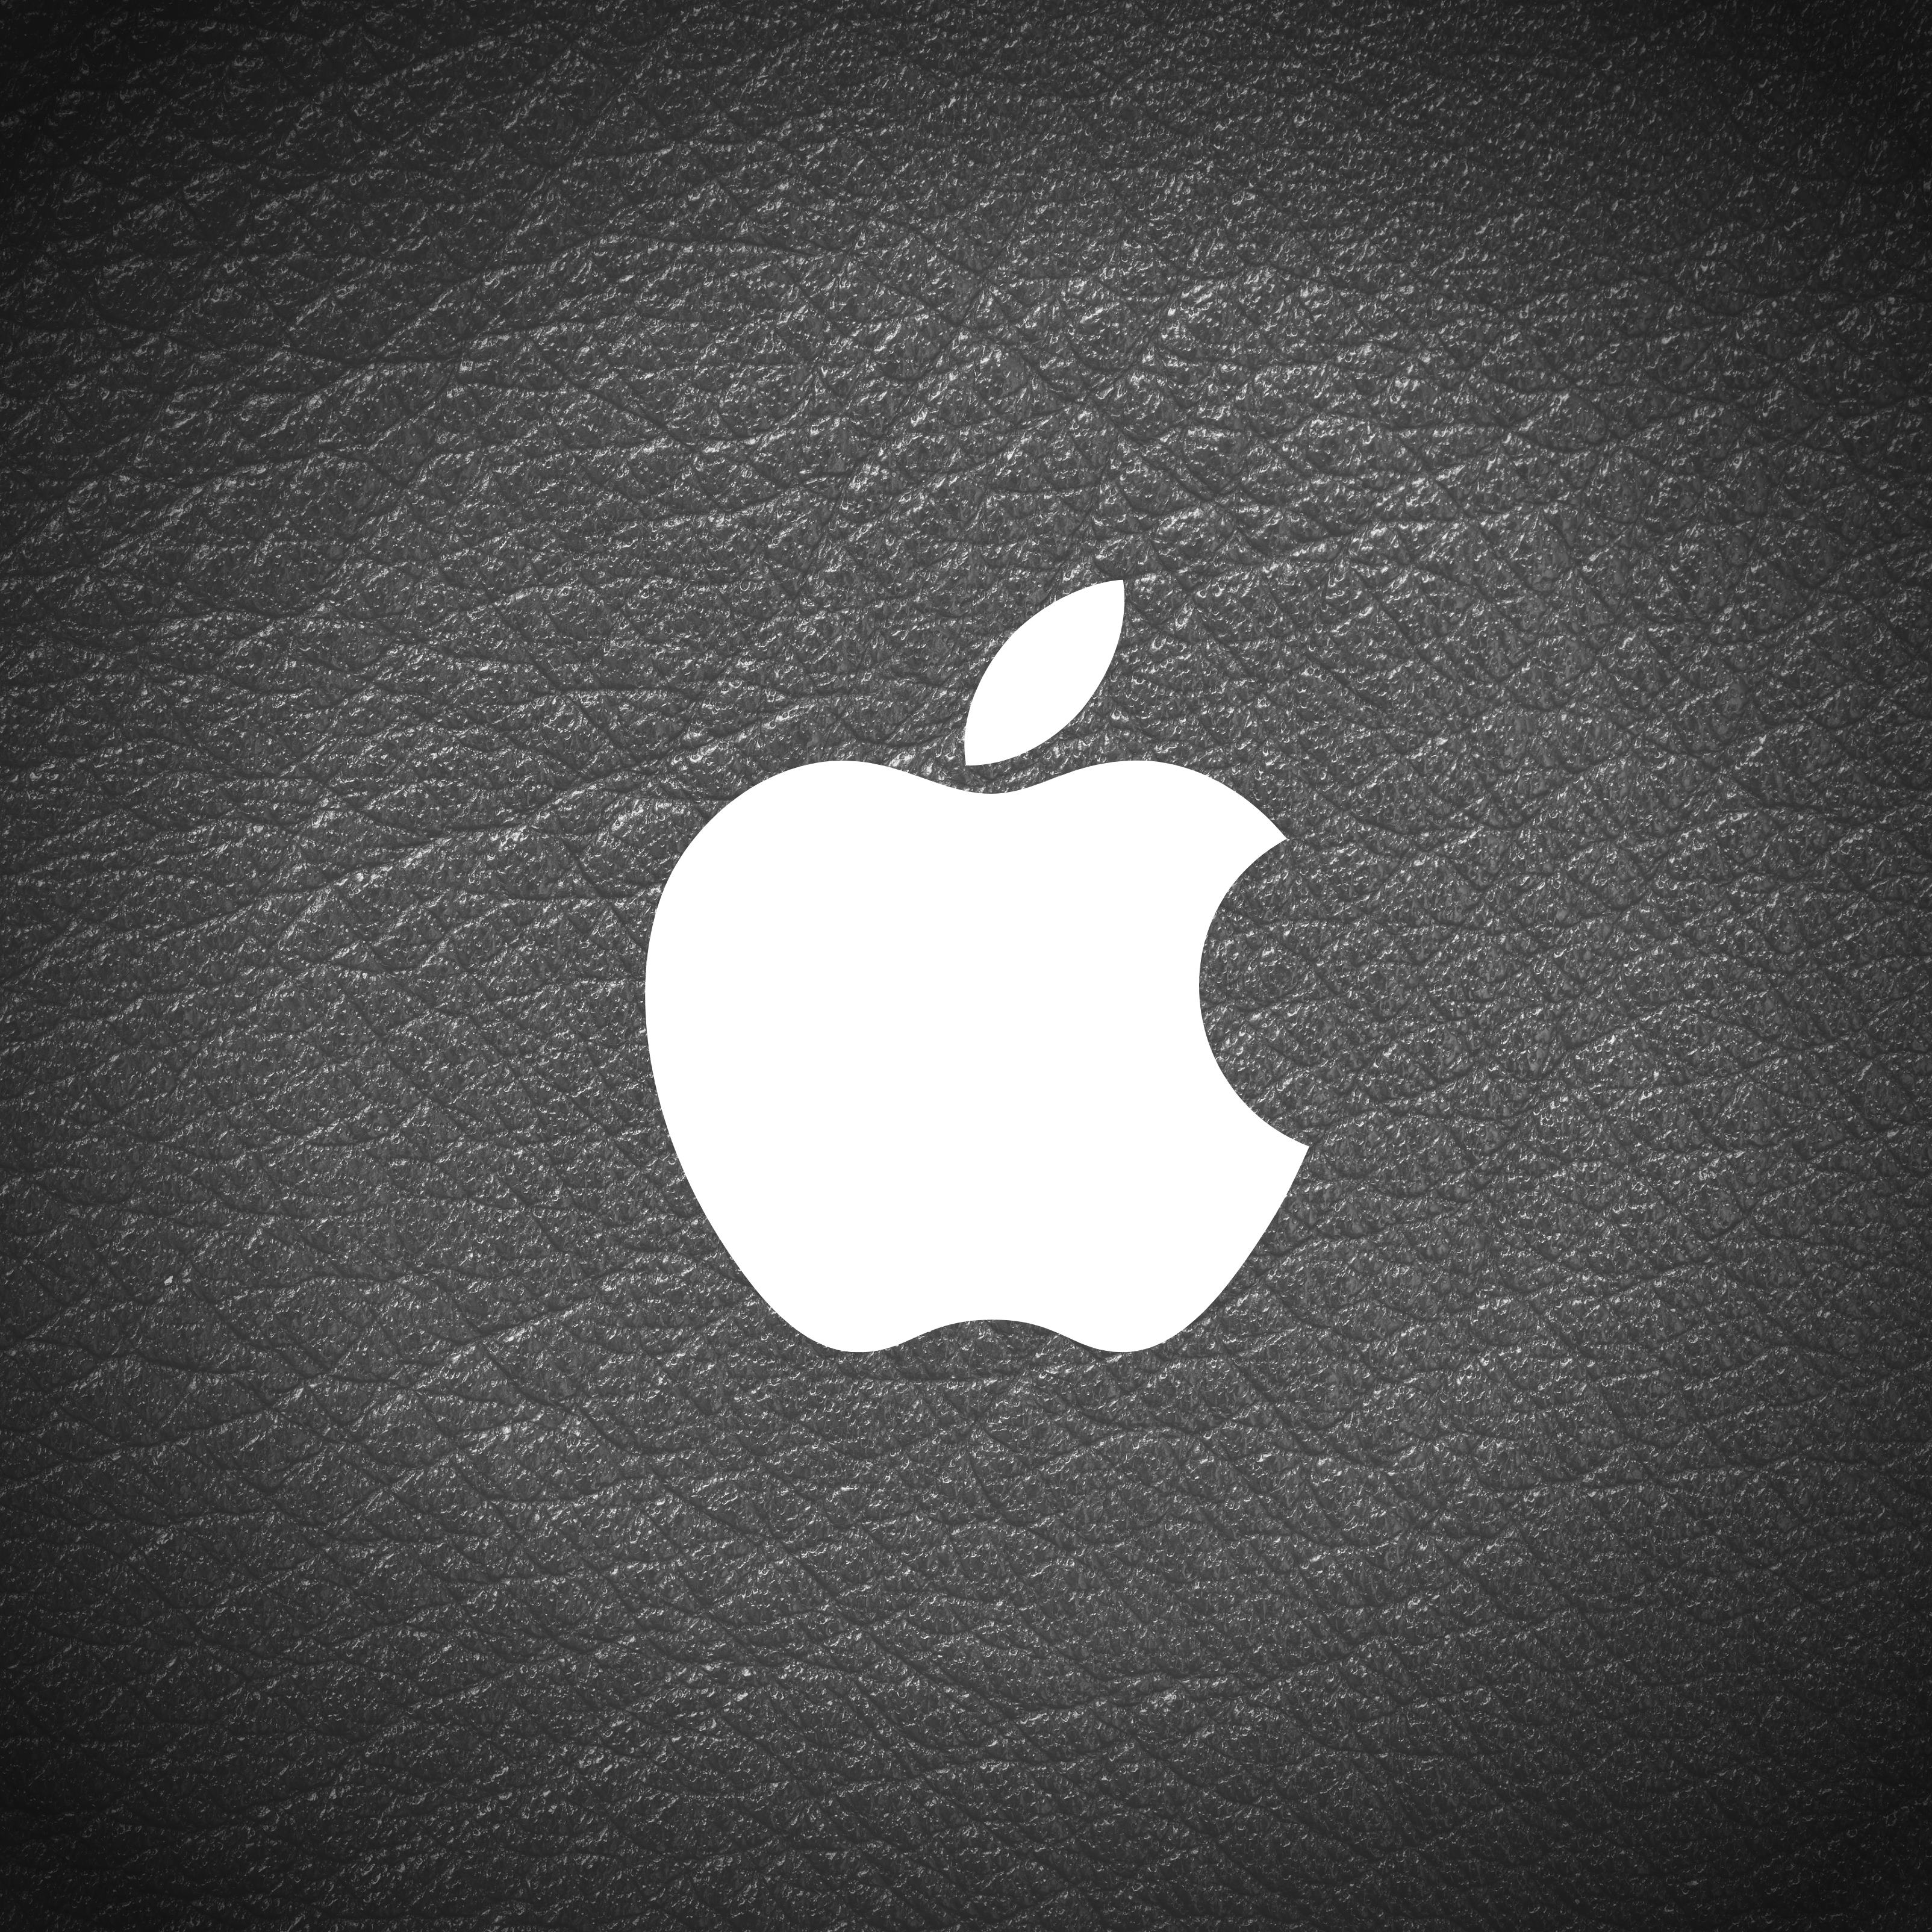 iPad Wallpapers Apple Logo Leather Black and White iPad Wallpaper 3208x3208 px